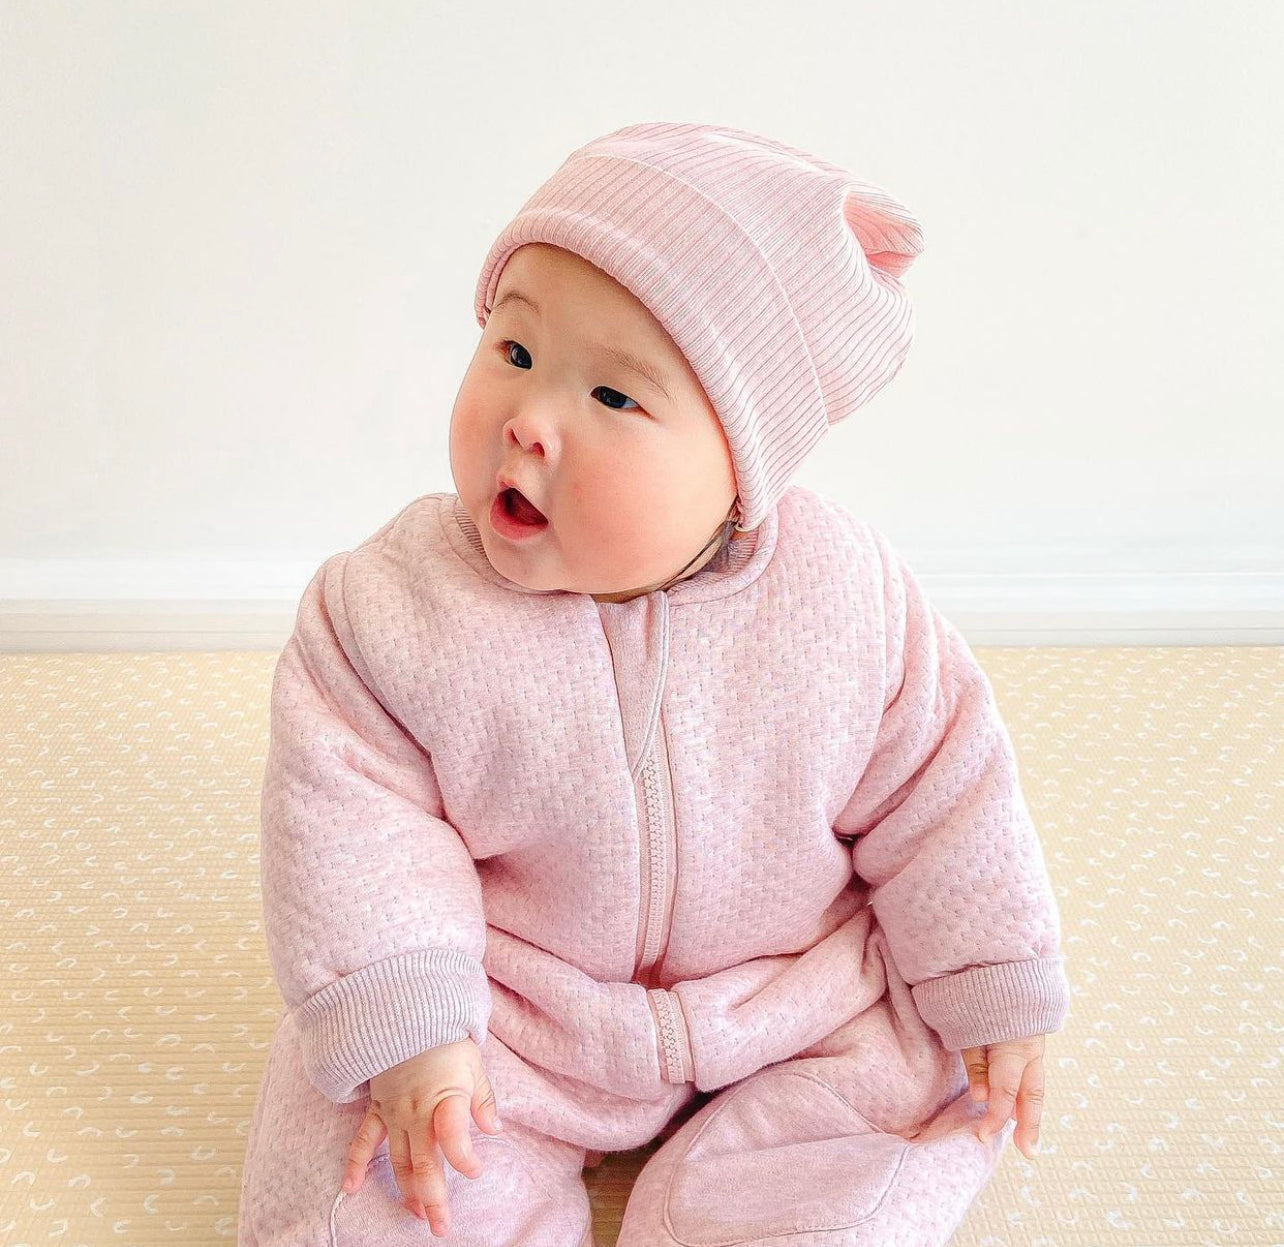 warmies cotton with arms and legs 3.0 tog - Dusty Pink